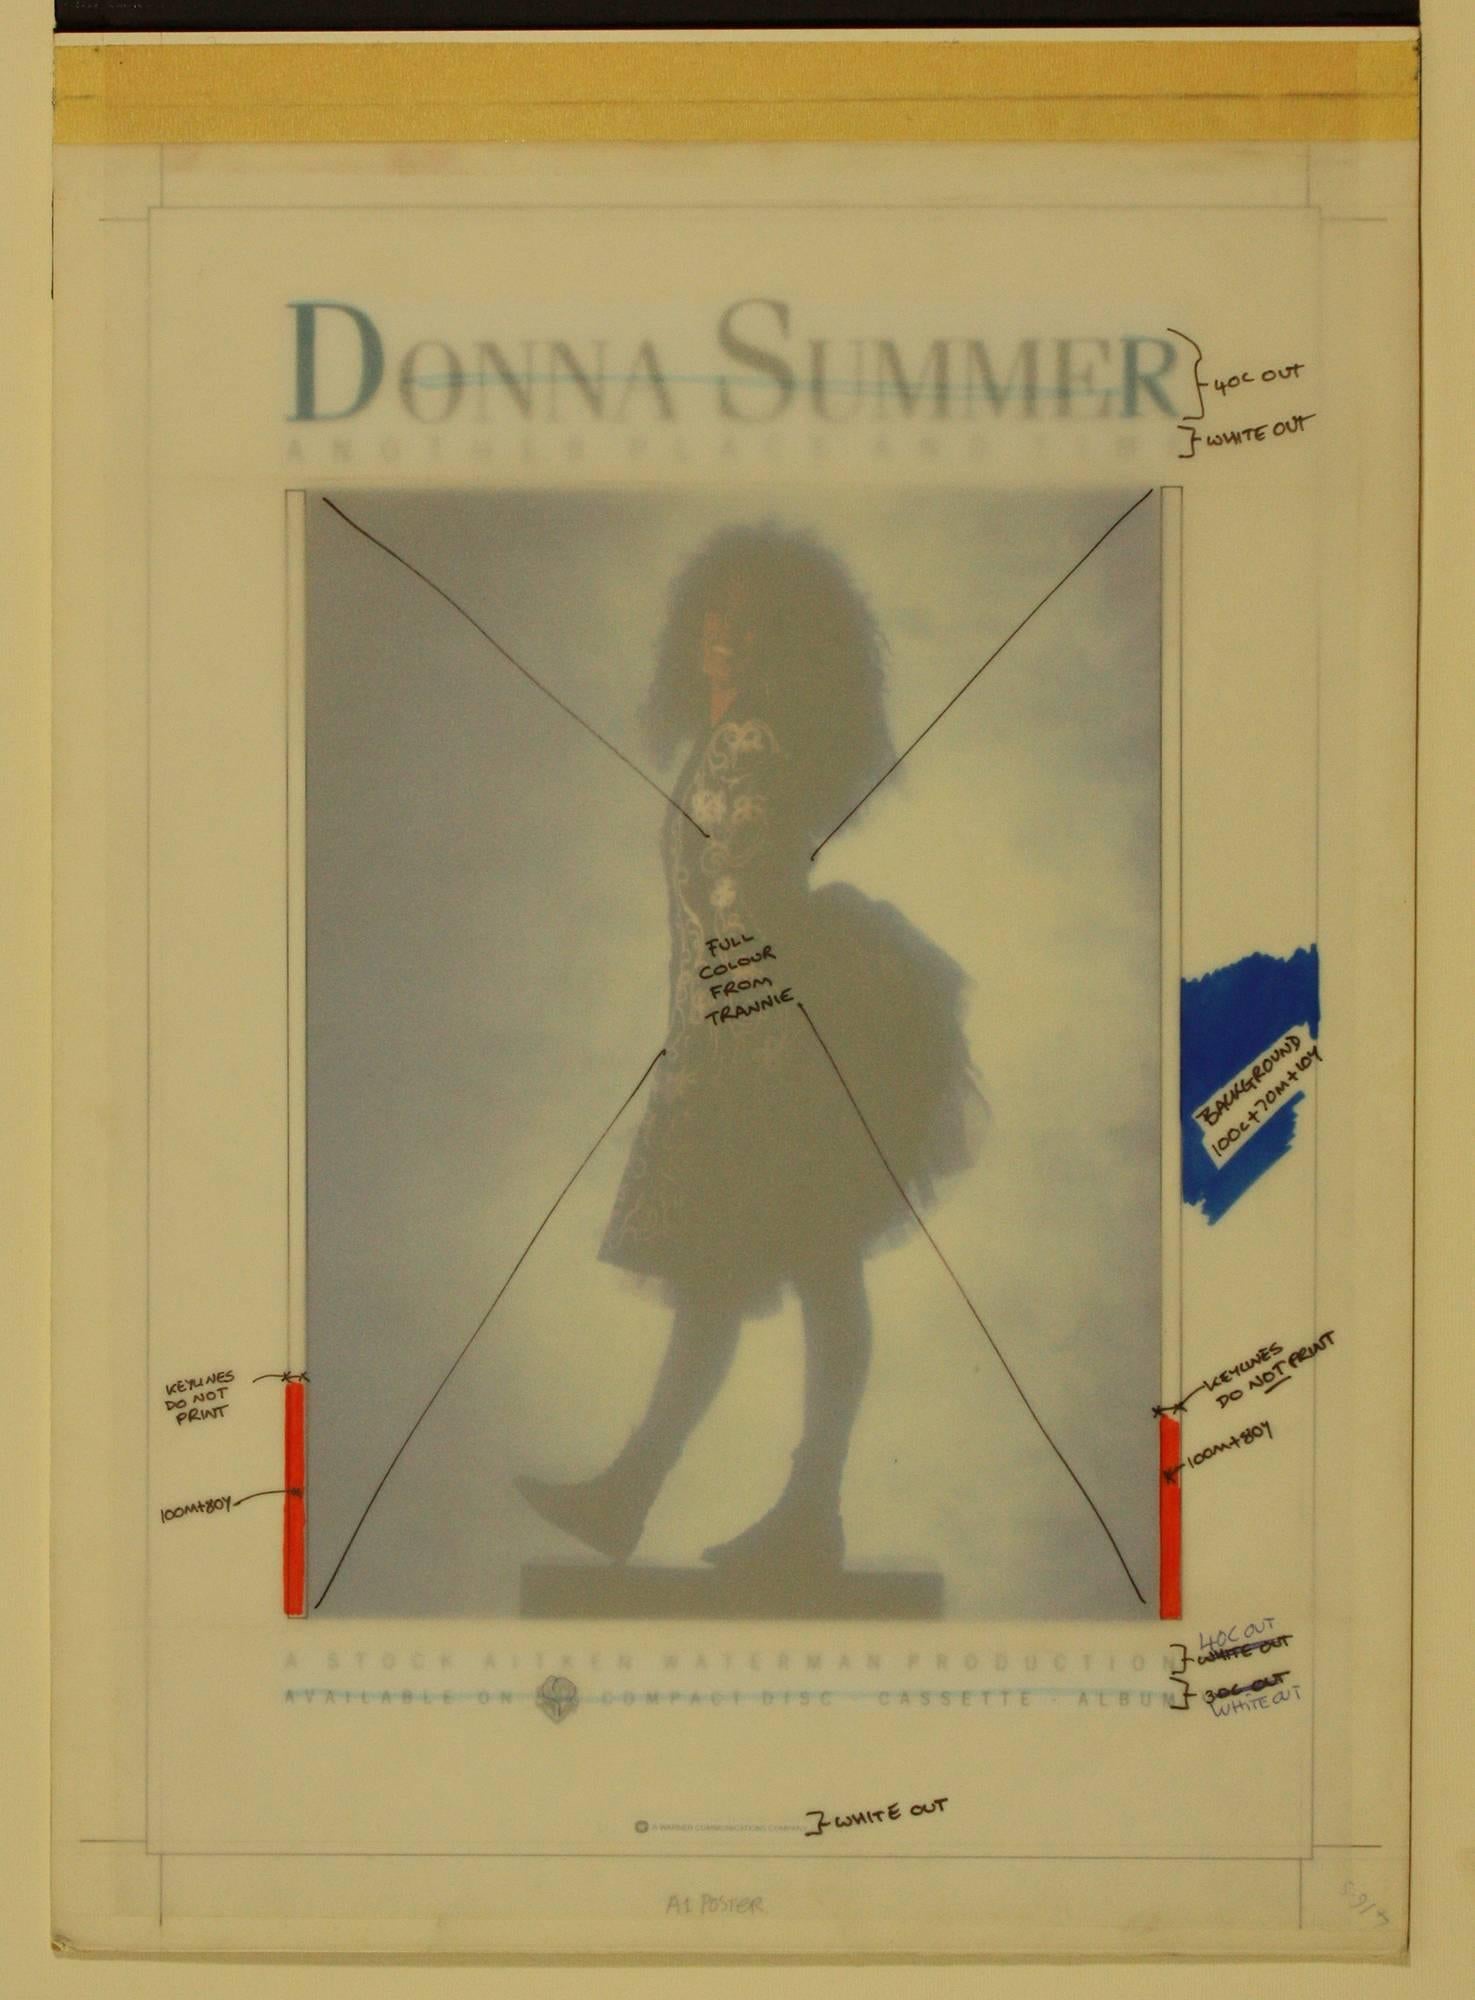 DONNA SUMMER Another Place and Time Original Production Artwork 1989 For Sale 1